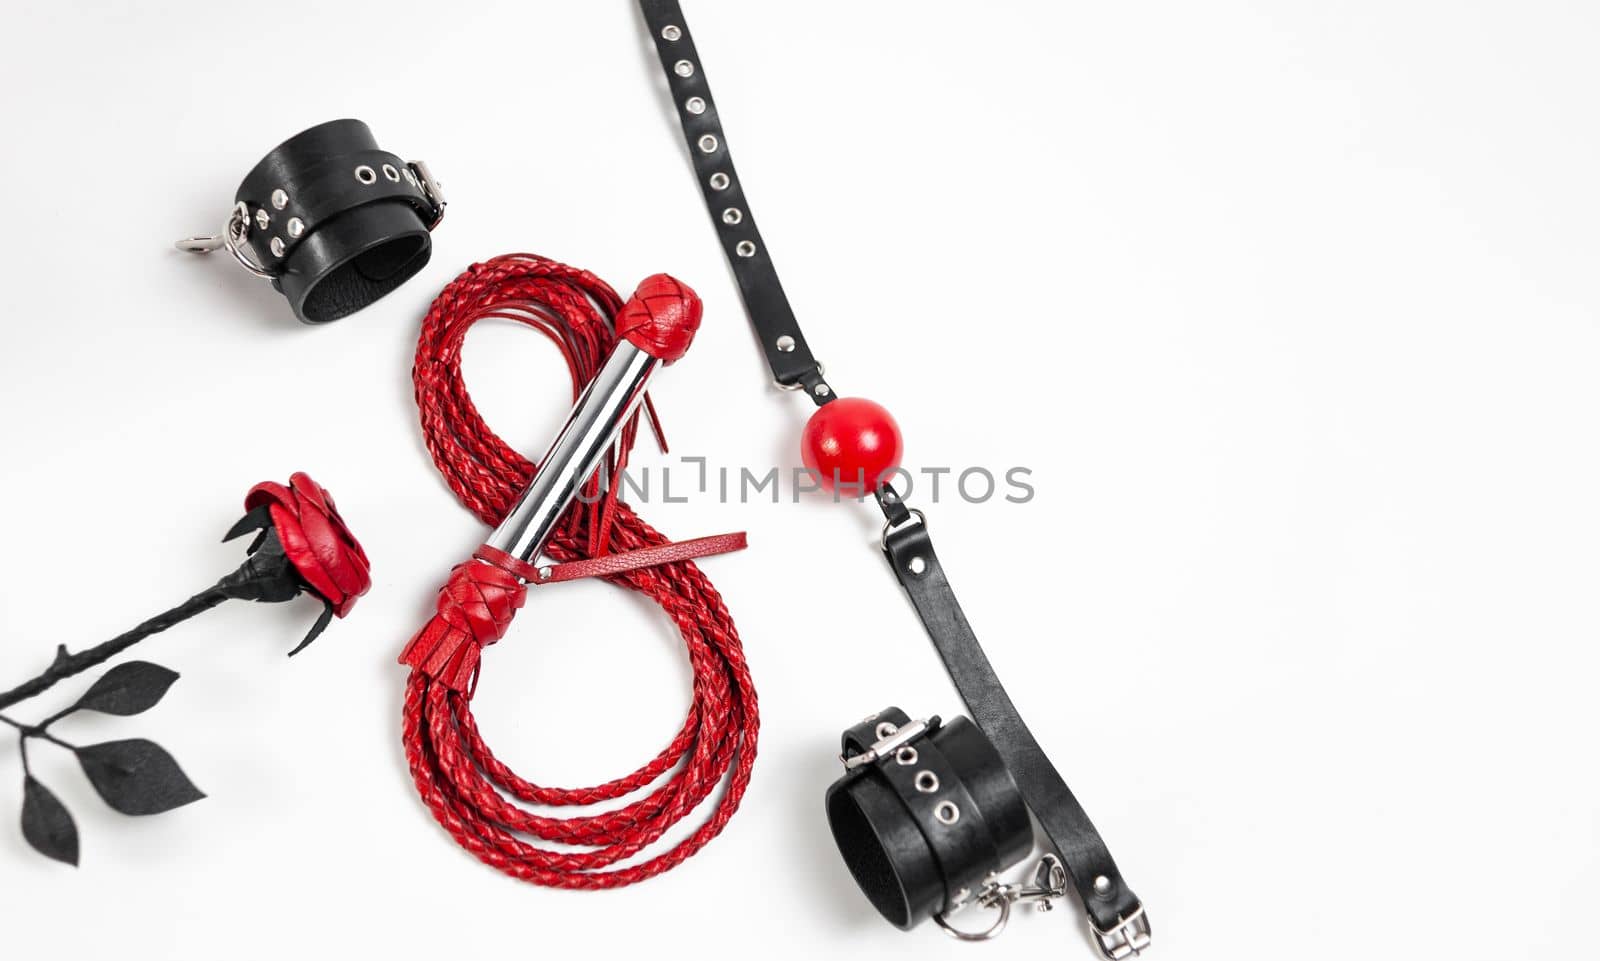 For the March 8 holiday sexy bdsm sex play accessories set from a sex shop on a white background copy-paste